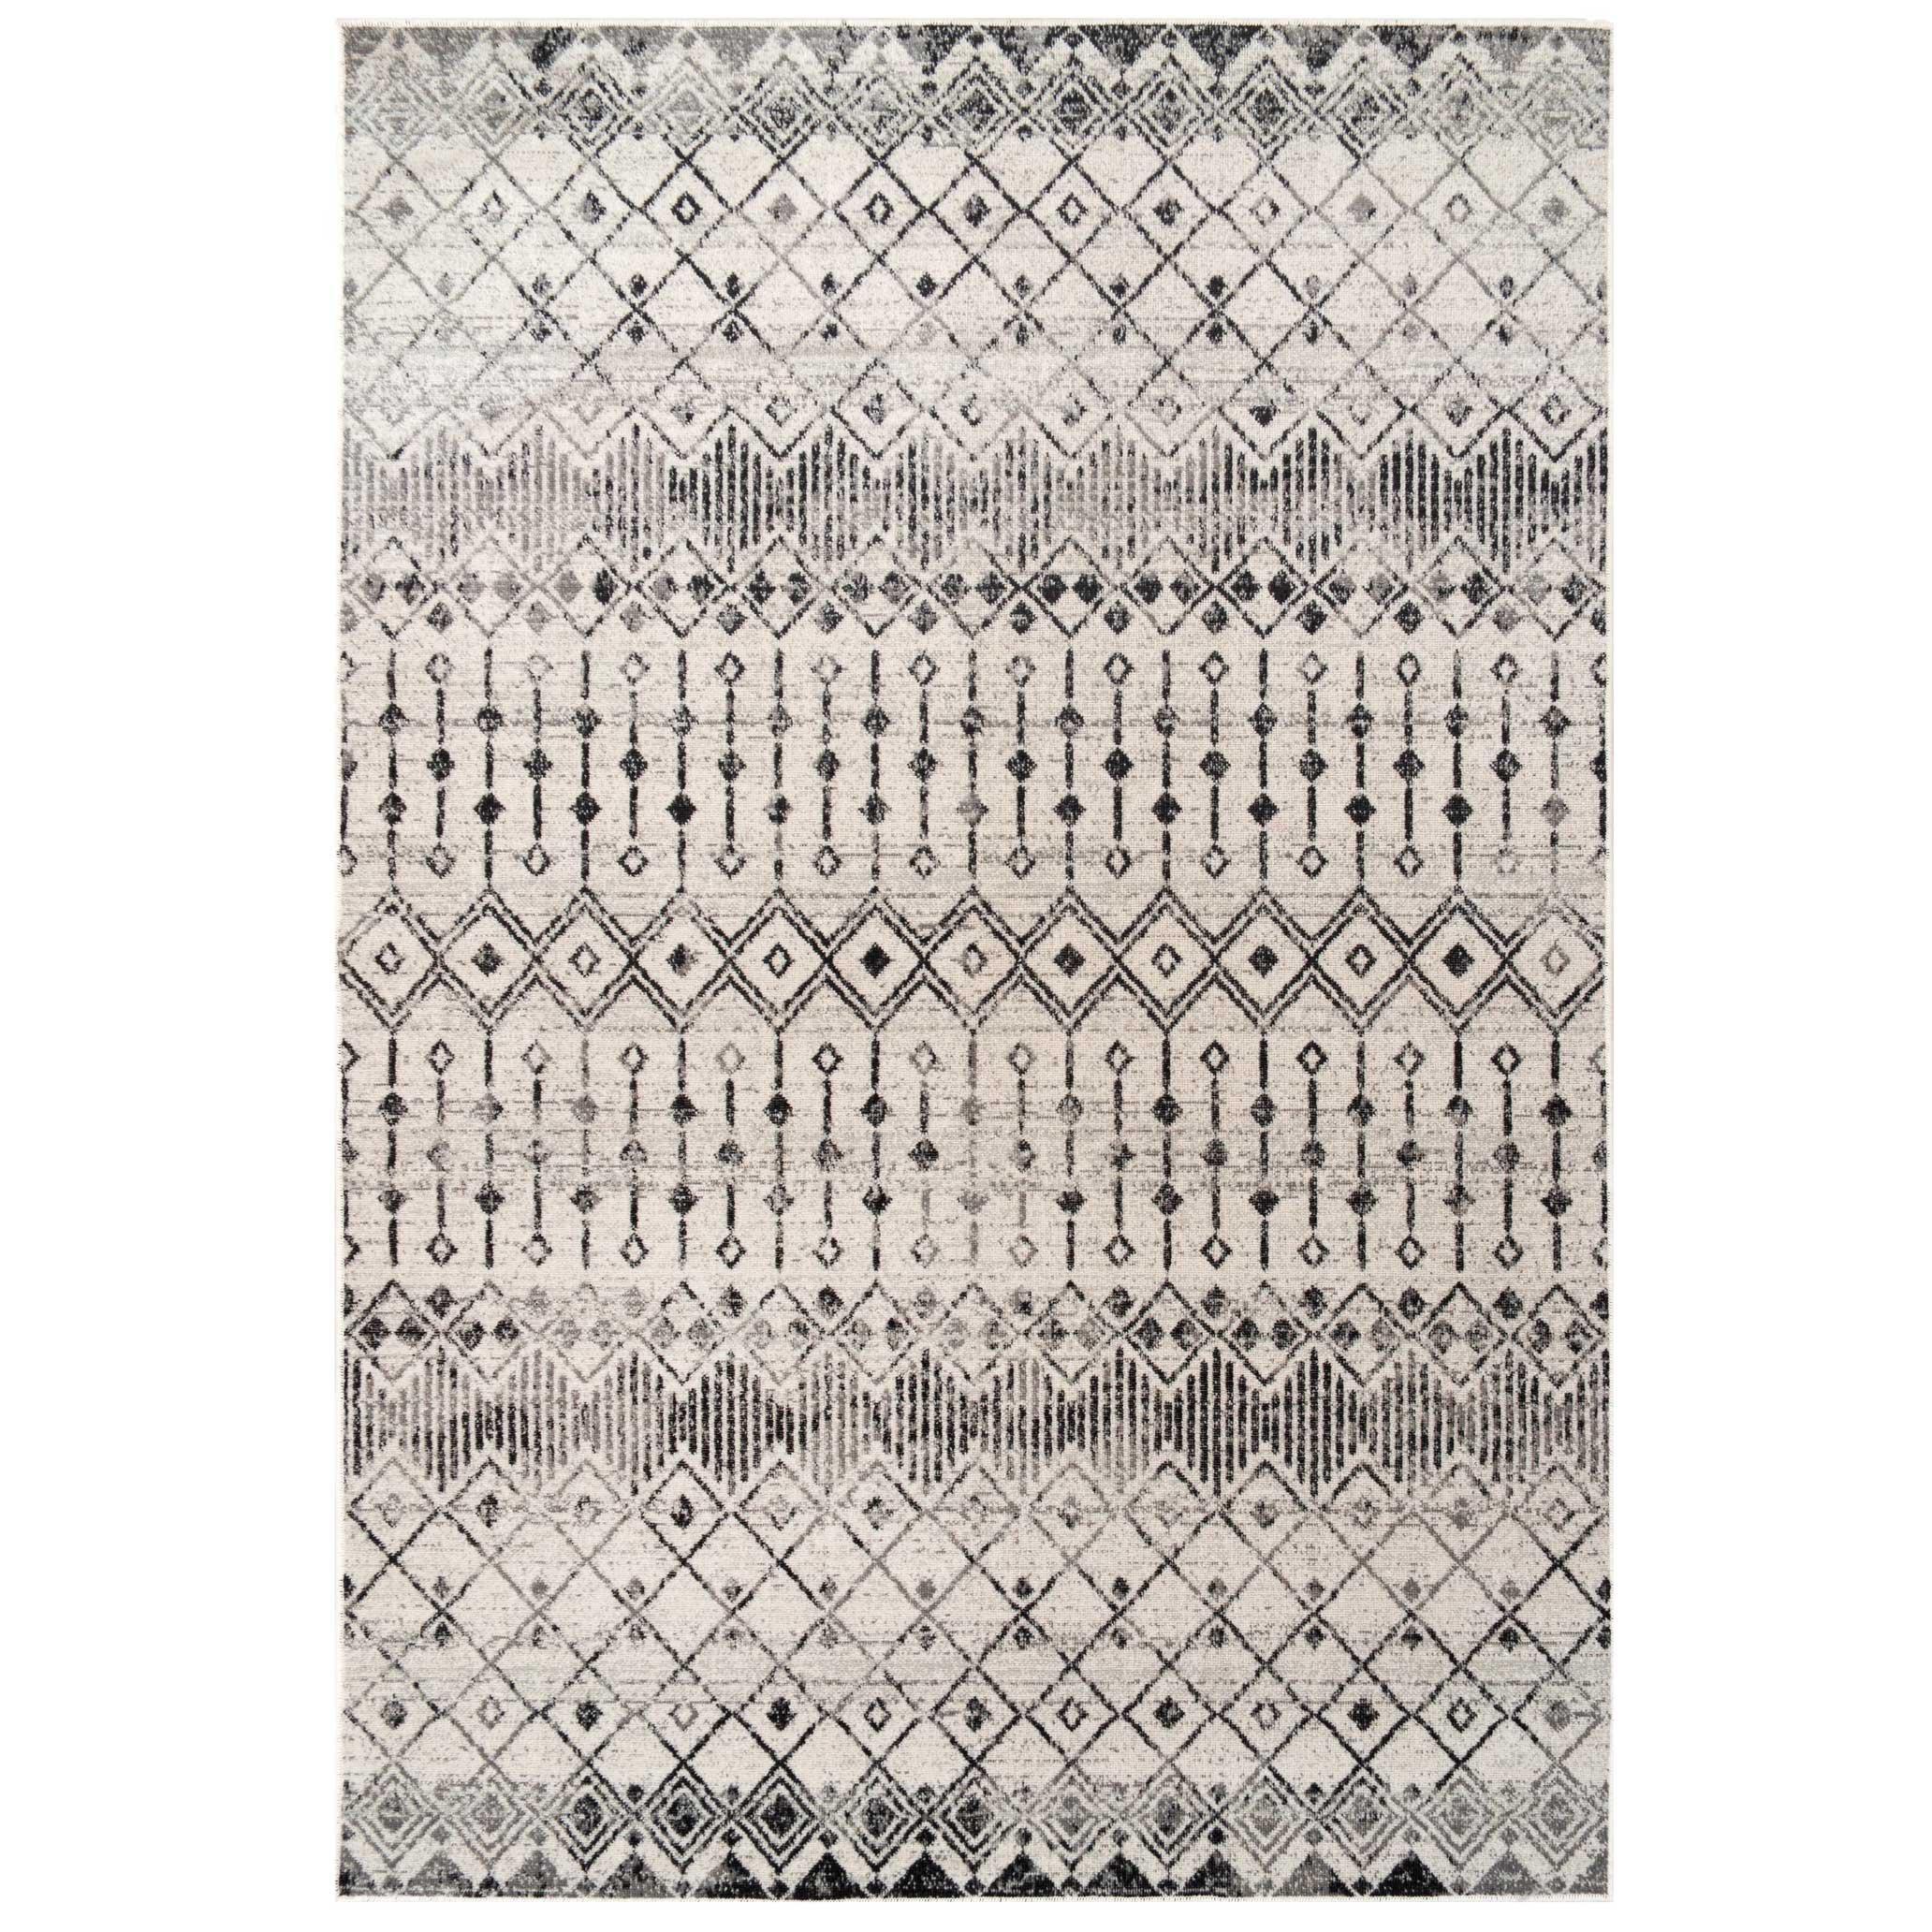 Grey Aztec Tribal Pattern Distressed Low Pile Area Rug